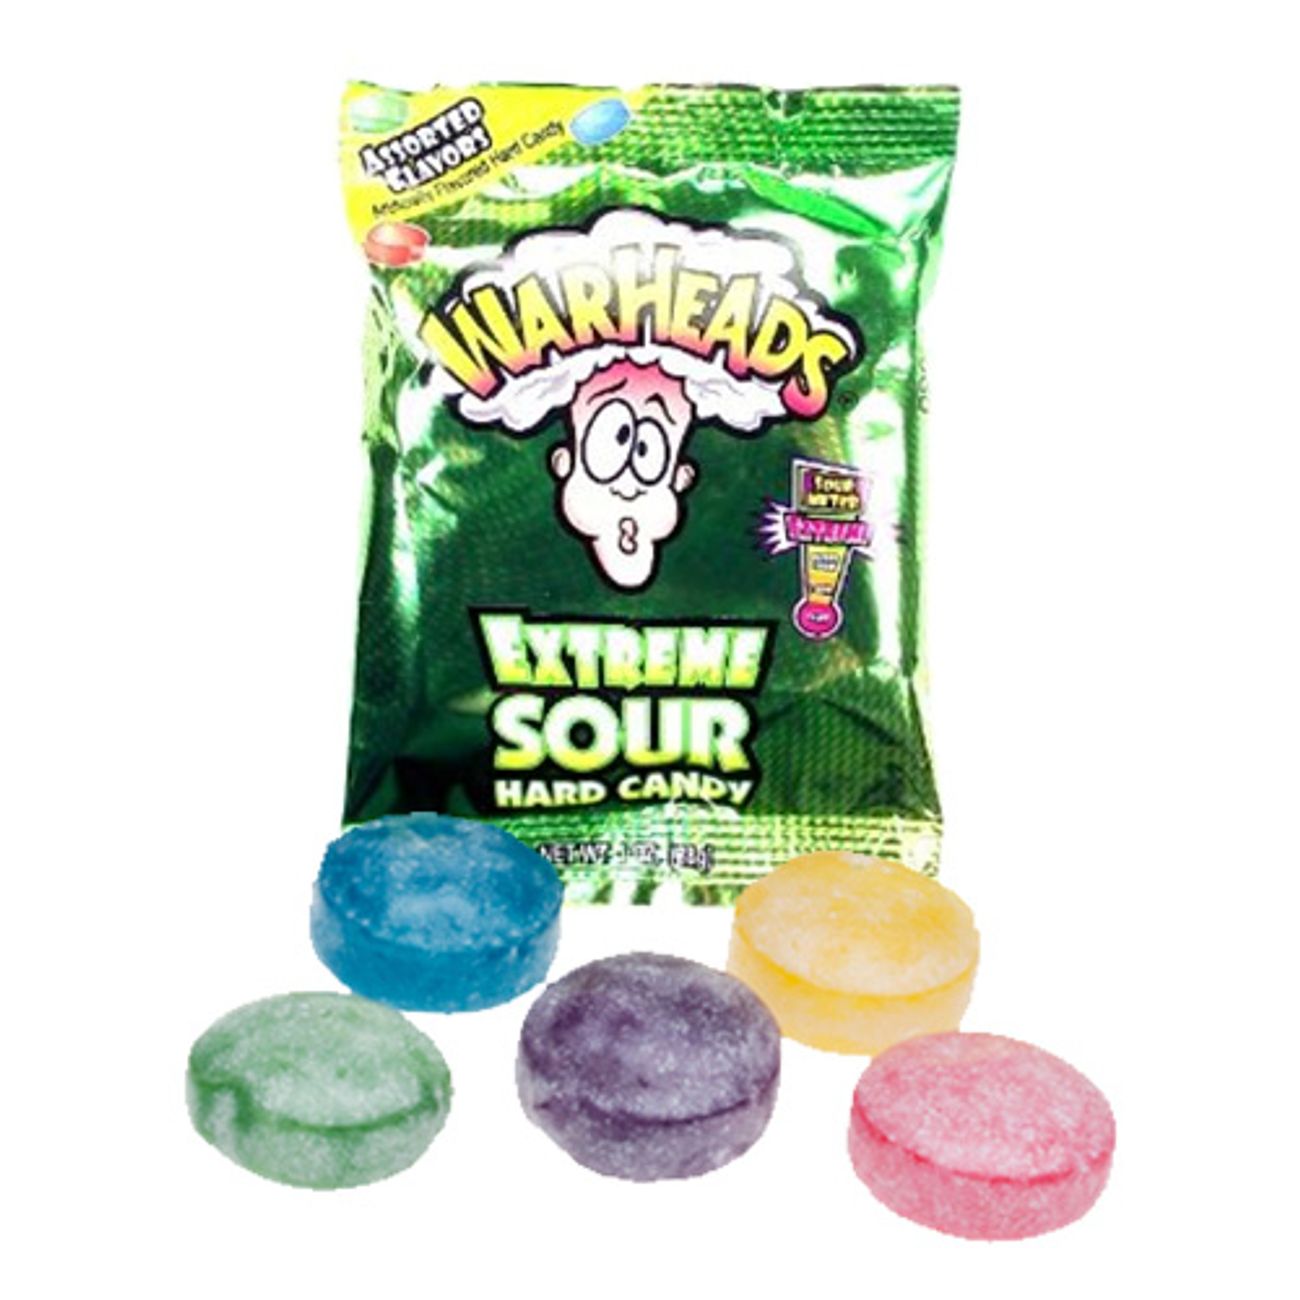 warheads-extreme-sour-hard-candy-1